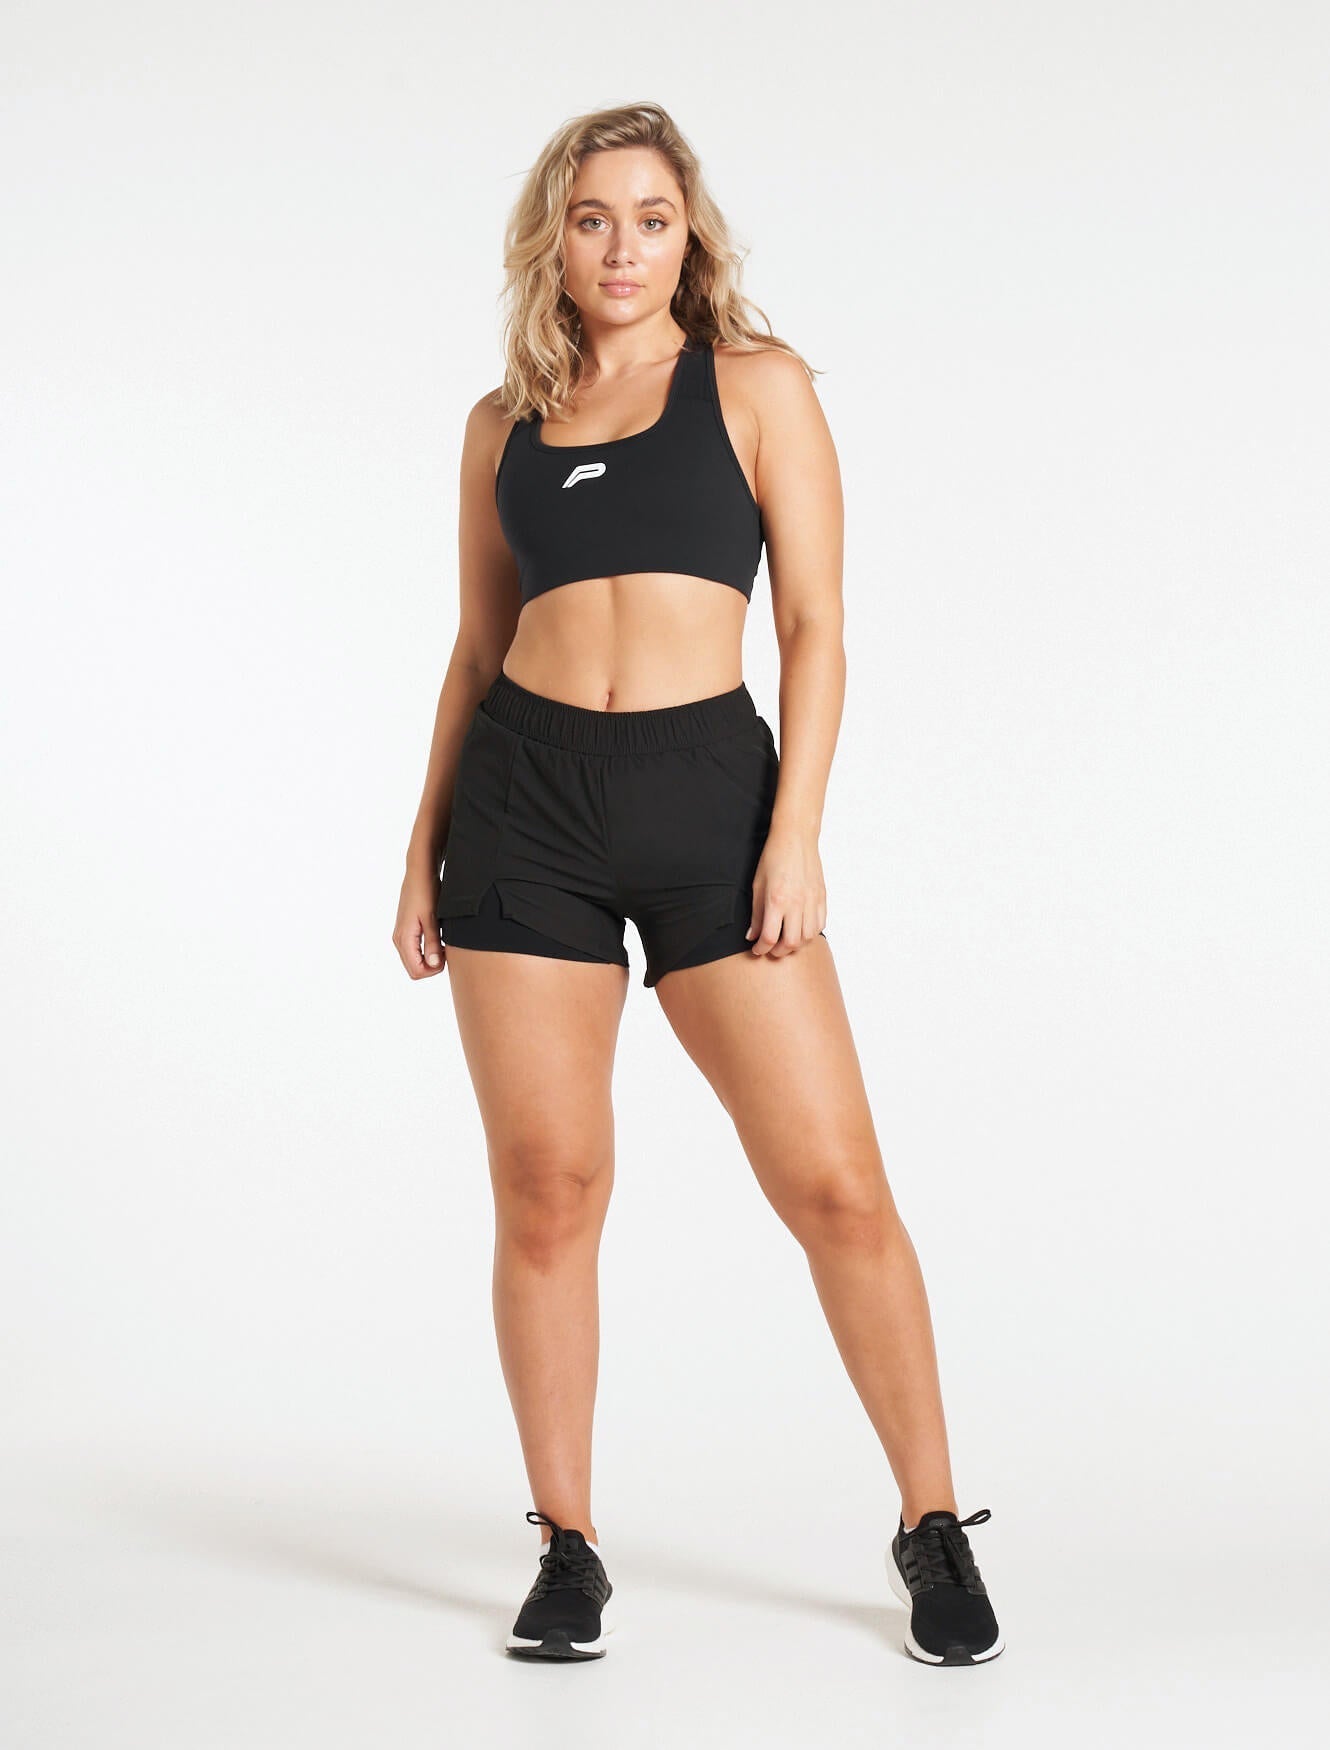 Pace Running Shorts / Blackout Pursue Fitness 5